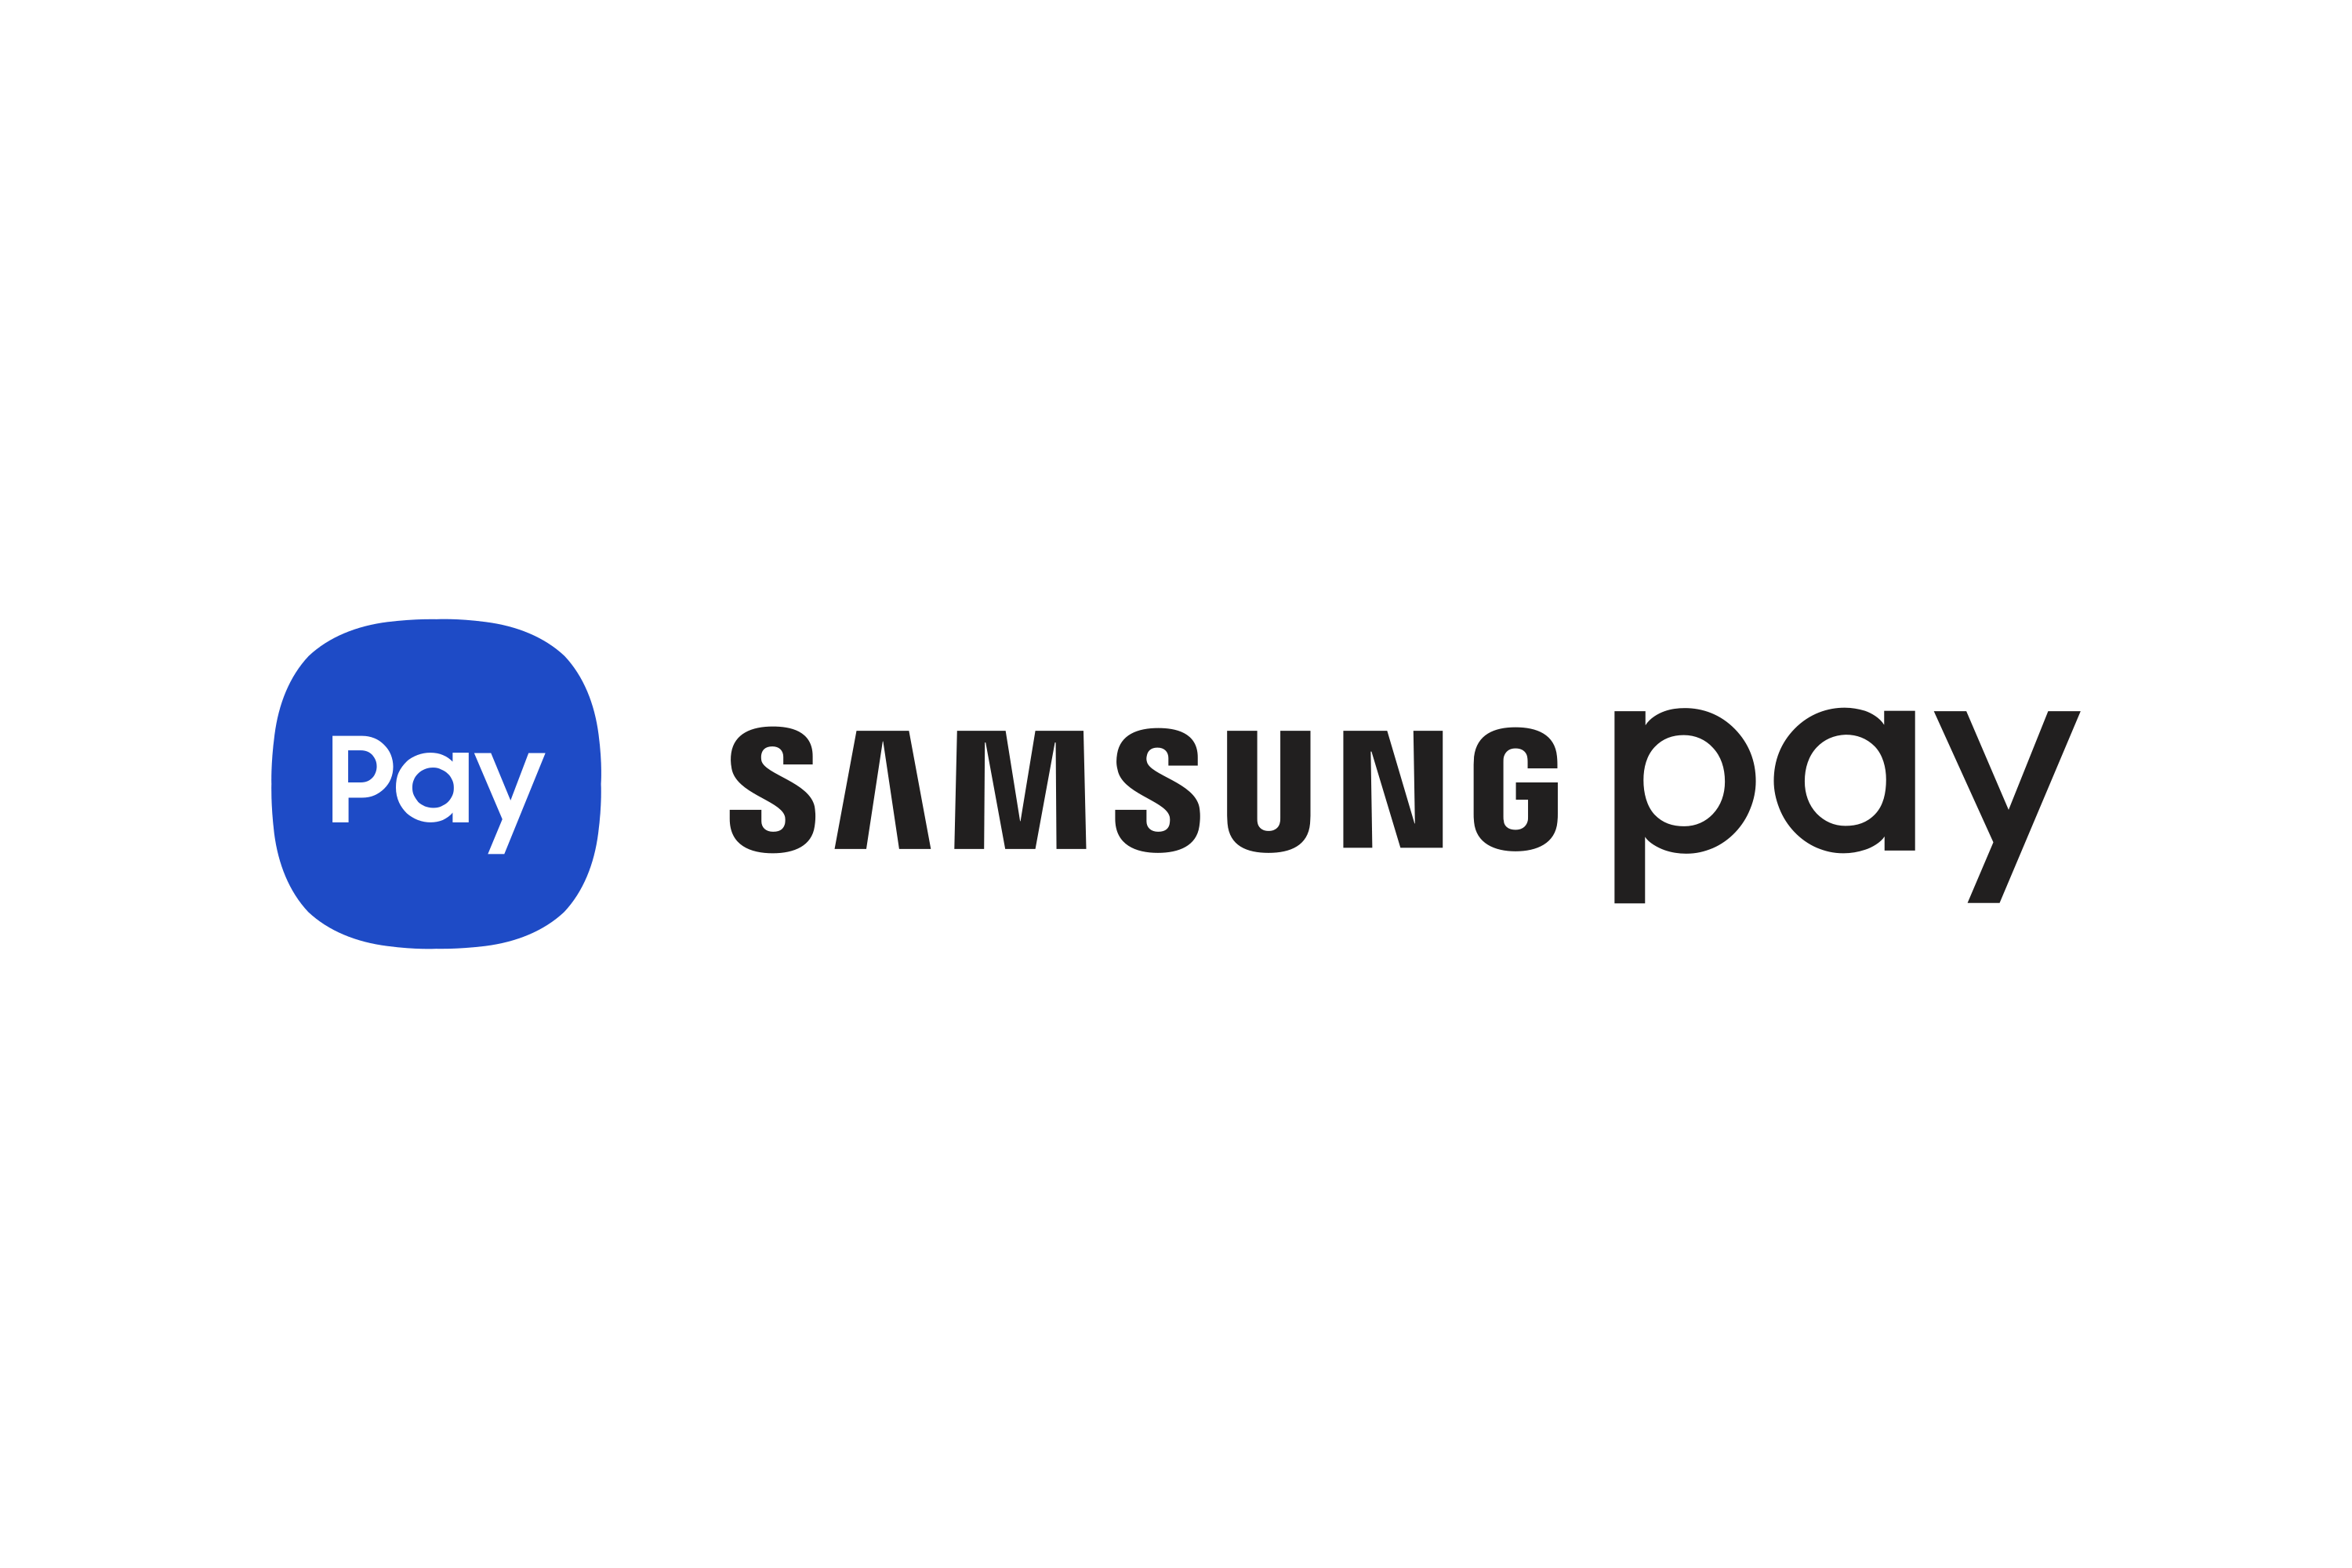 Download Samsung Pay Logo in SVG Vector or PNG File Format